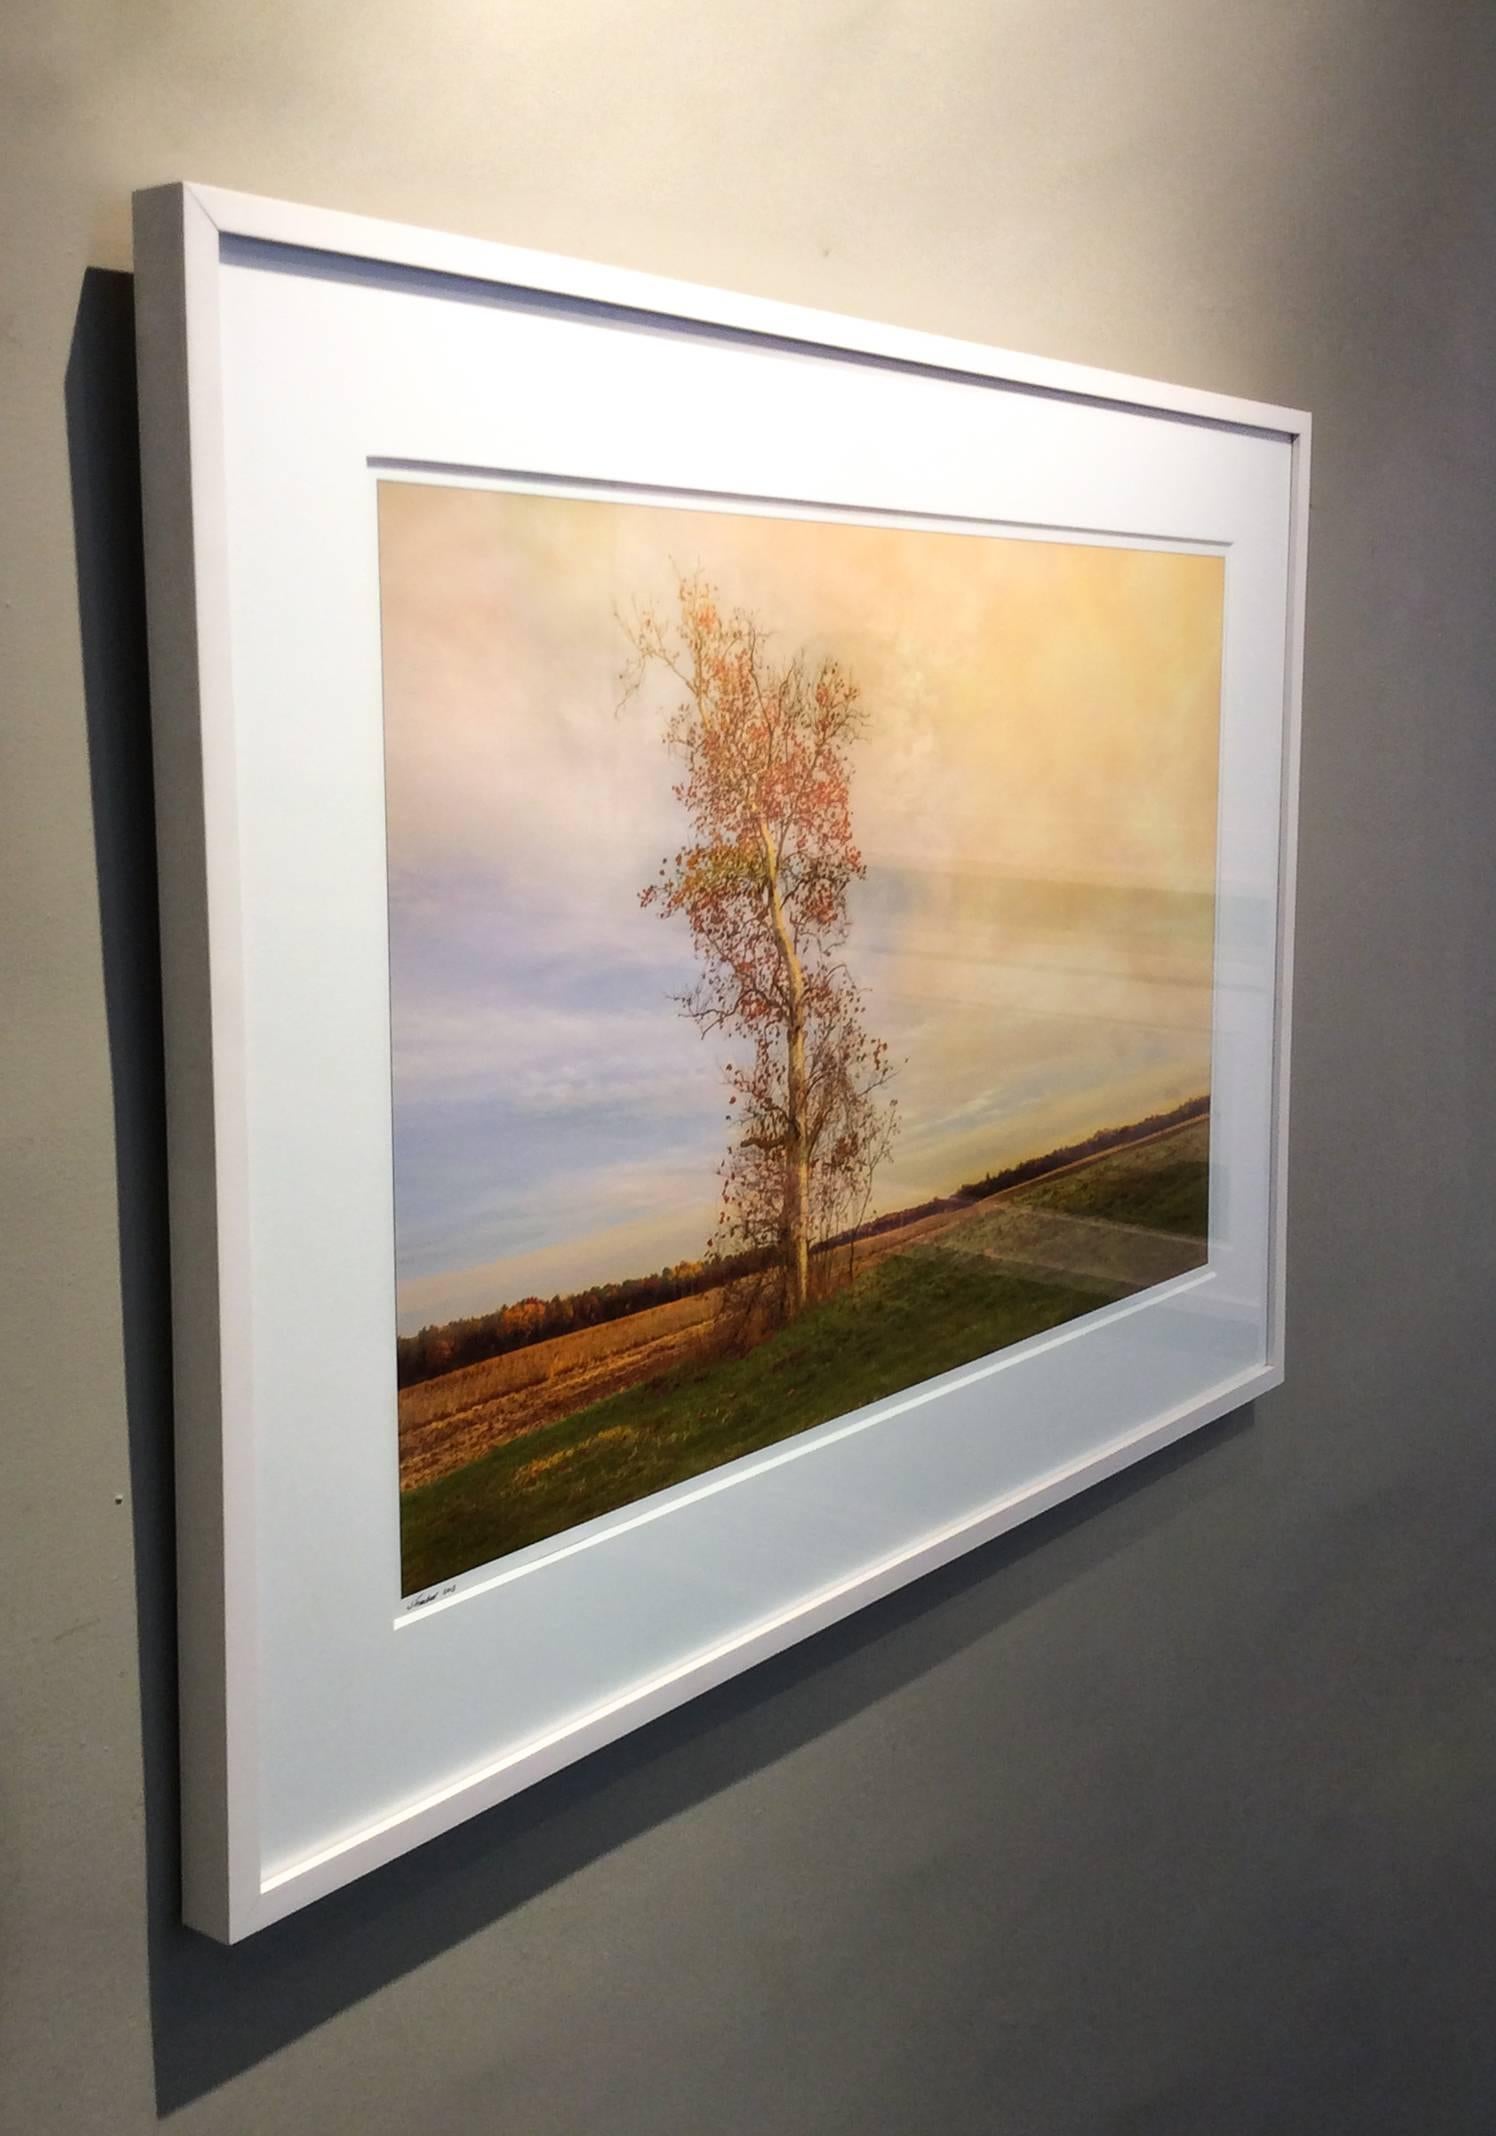 Modern landscape photograph of a tree in a country field during a beautiful Hudson Valley sunset. 
Archival pigment print on paper
32 x 44 inches framed, white moudling with 8-ply mat and non-reflective glass
Signed lower left

This modern, vibrant